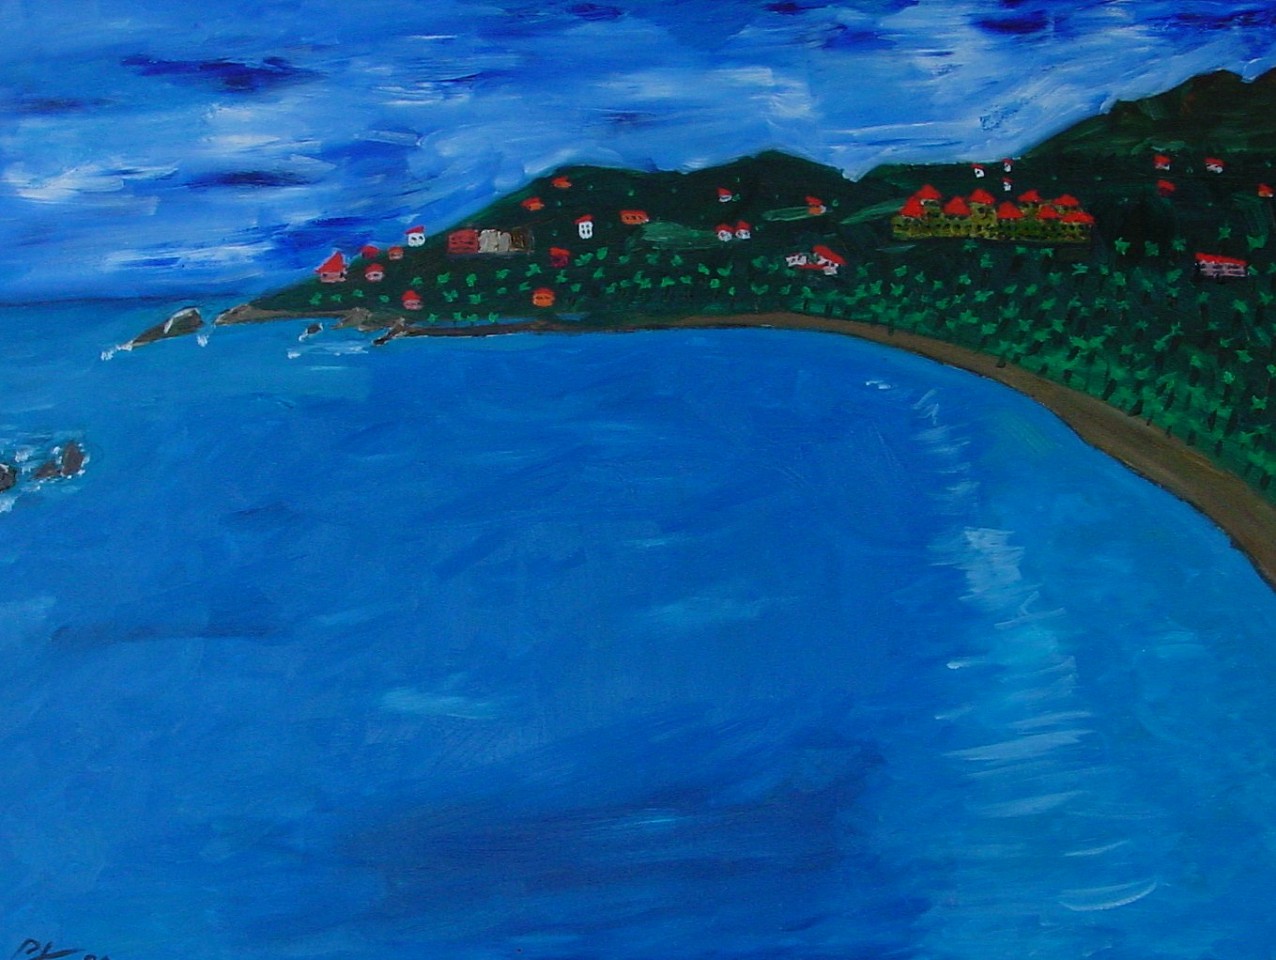 Diego Jacobson, Palmas, 2000
Oil on Canvas, 30 x 40 in. (76.2 x 101.6 cm)
0068